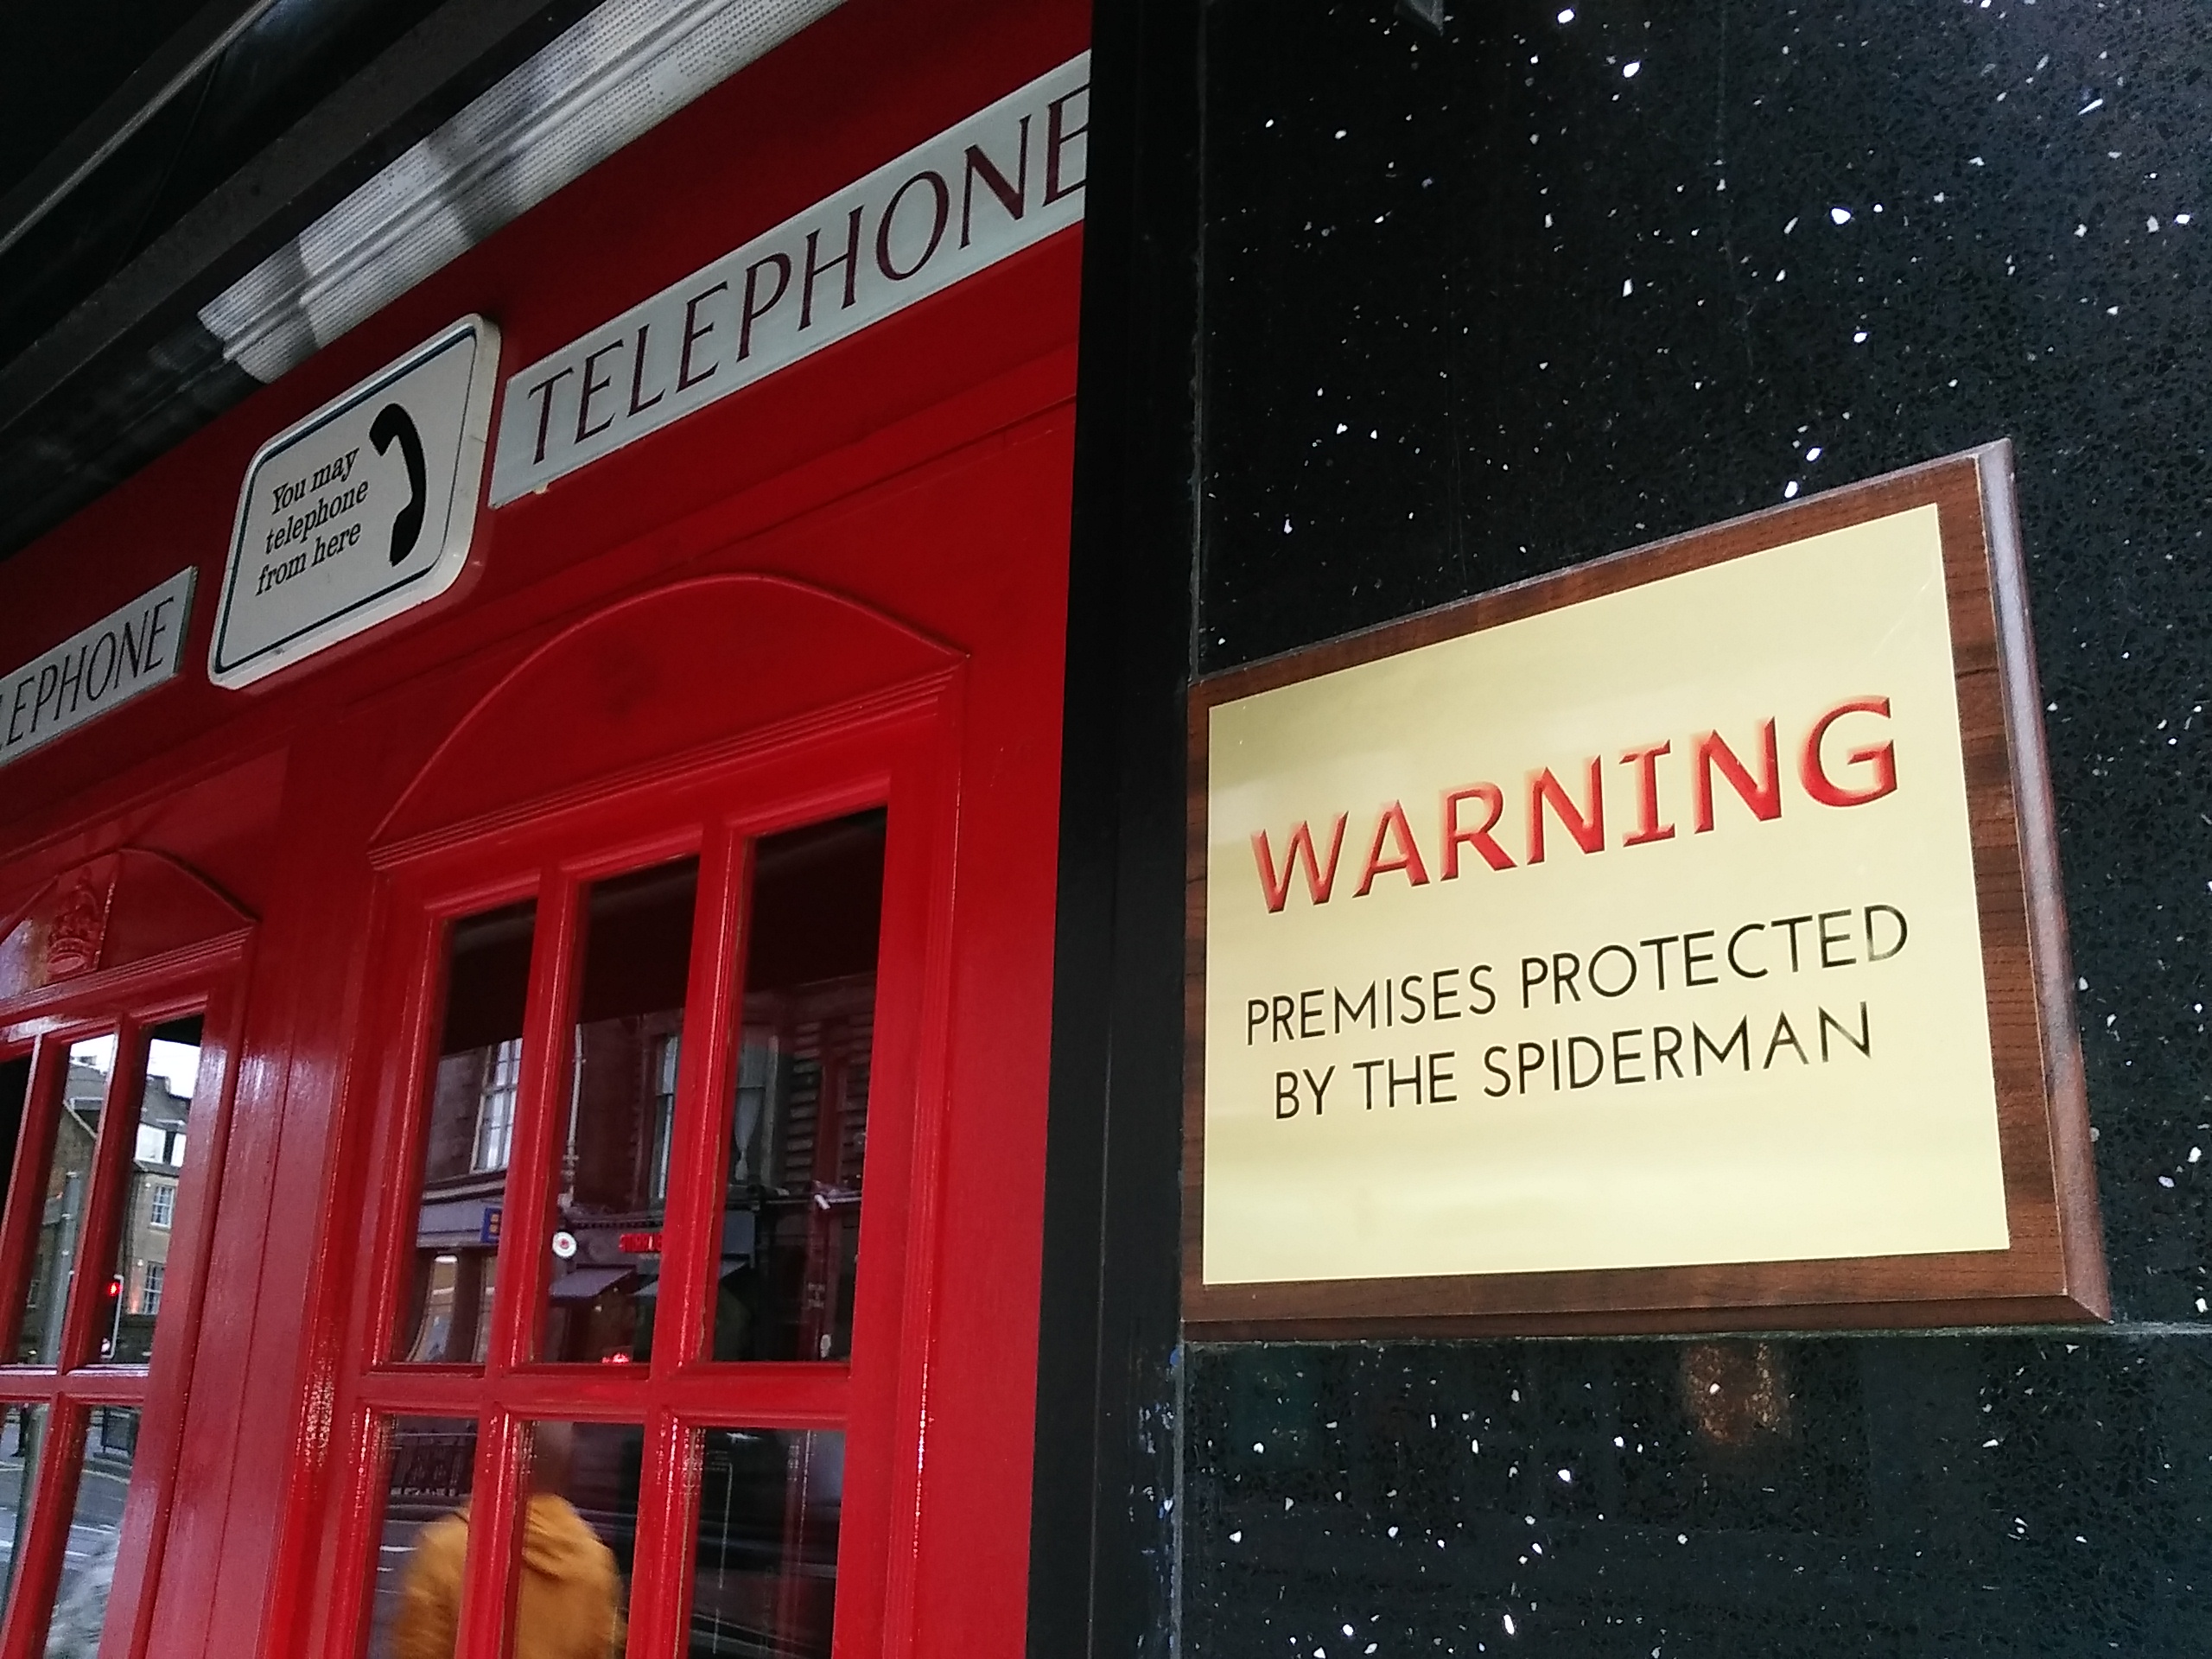 A red telephone cabin guarded by Spiderman